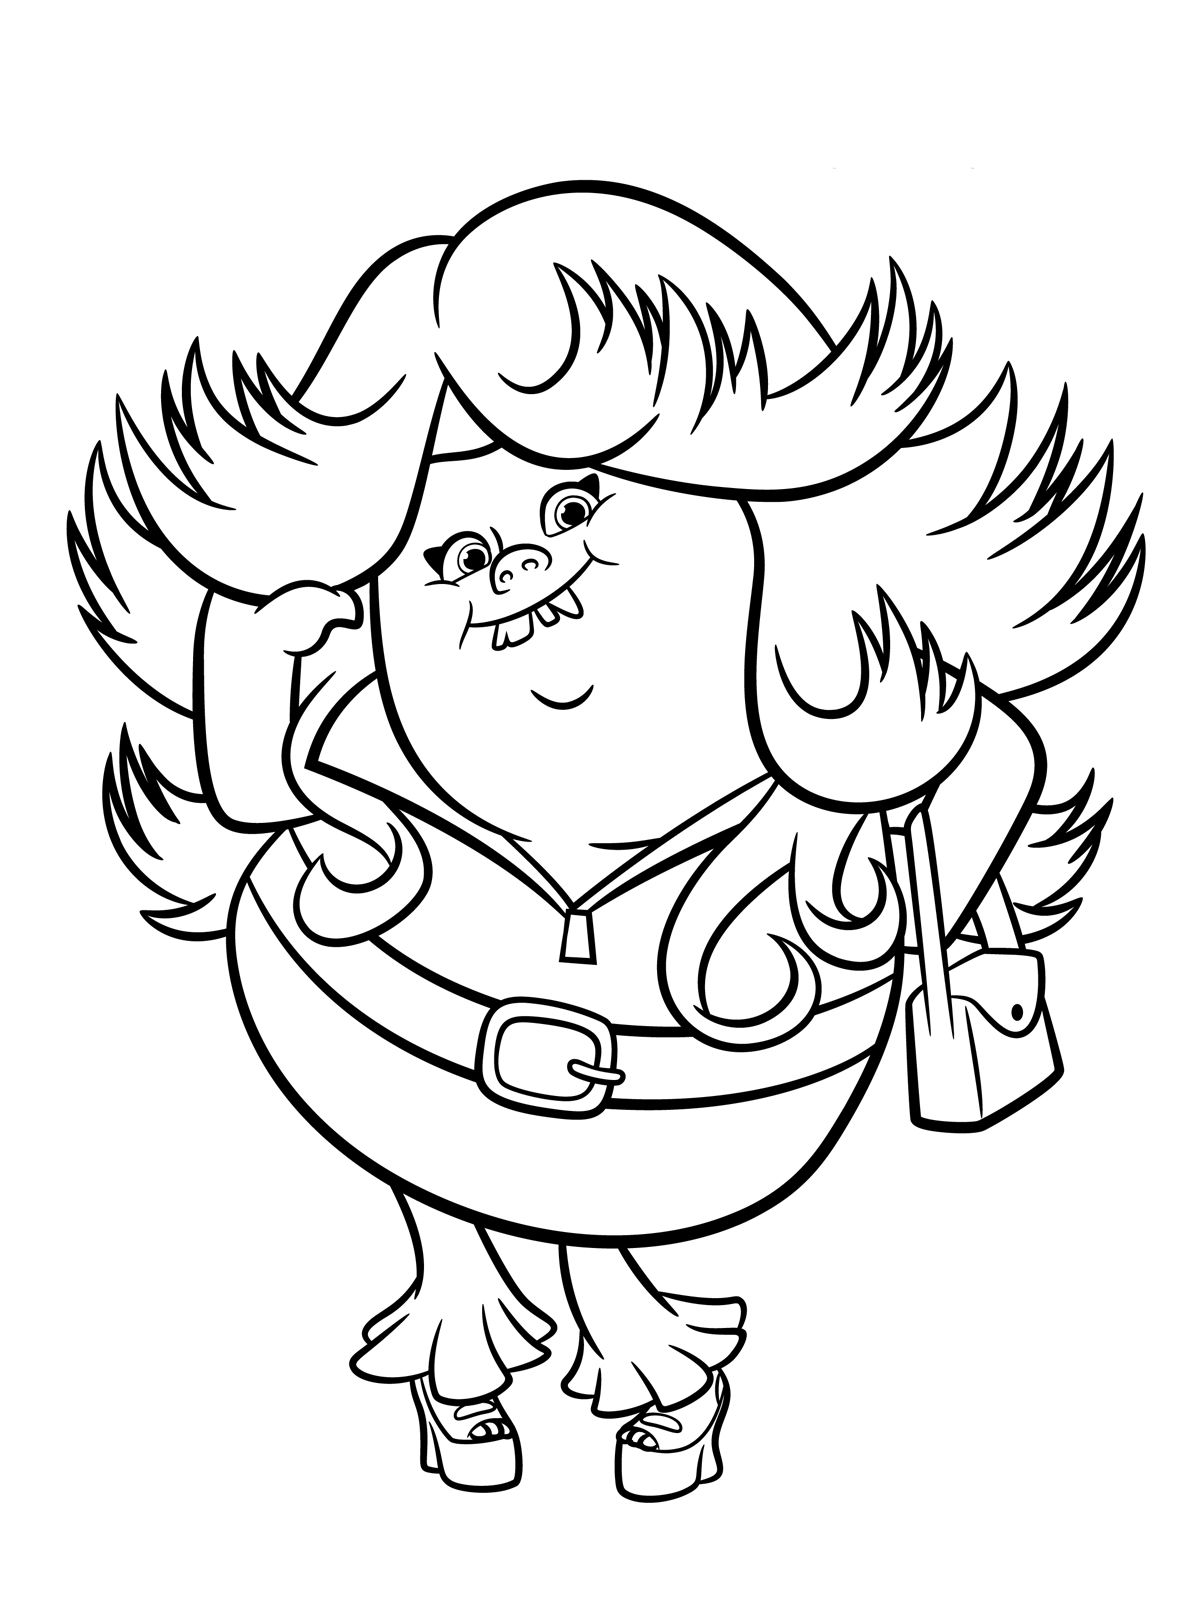 Trolls Printable Coloring Pages